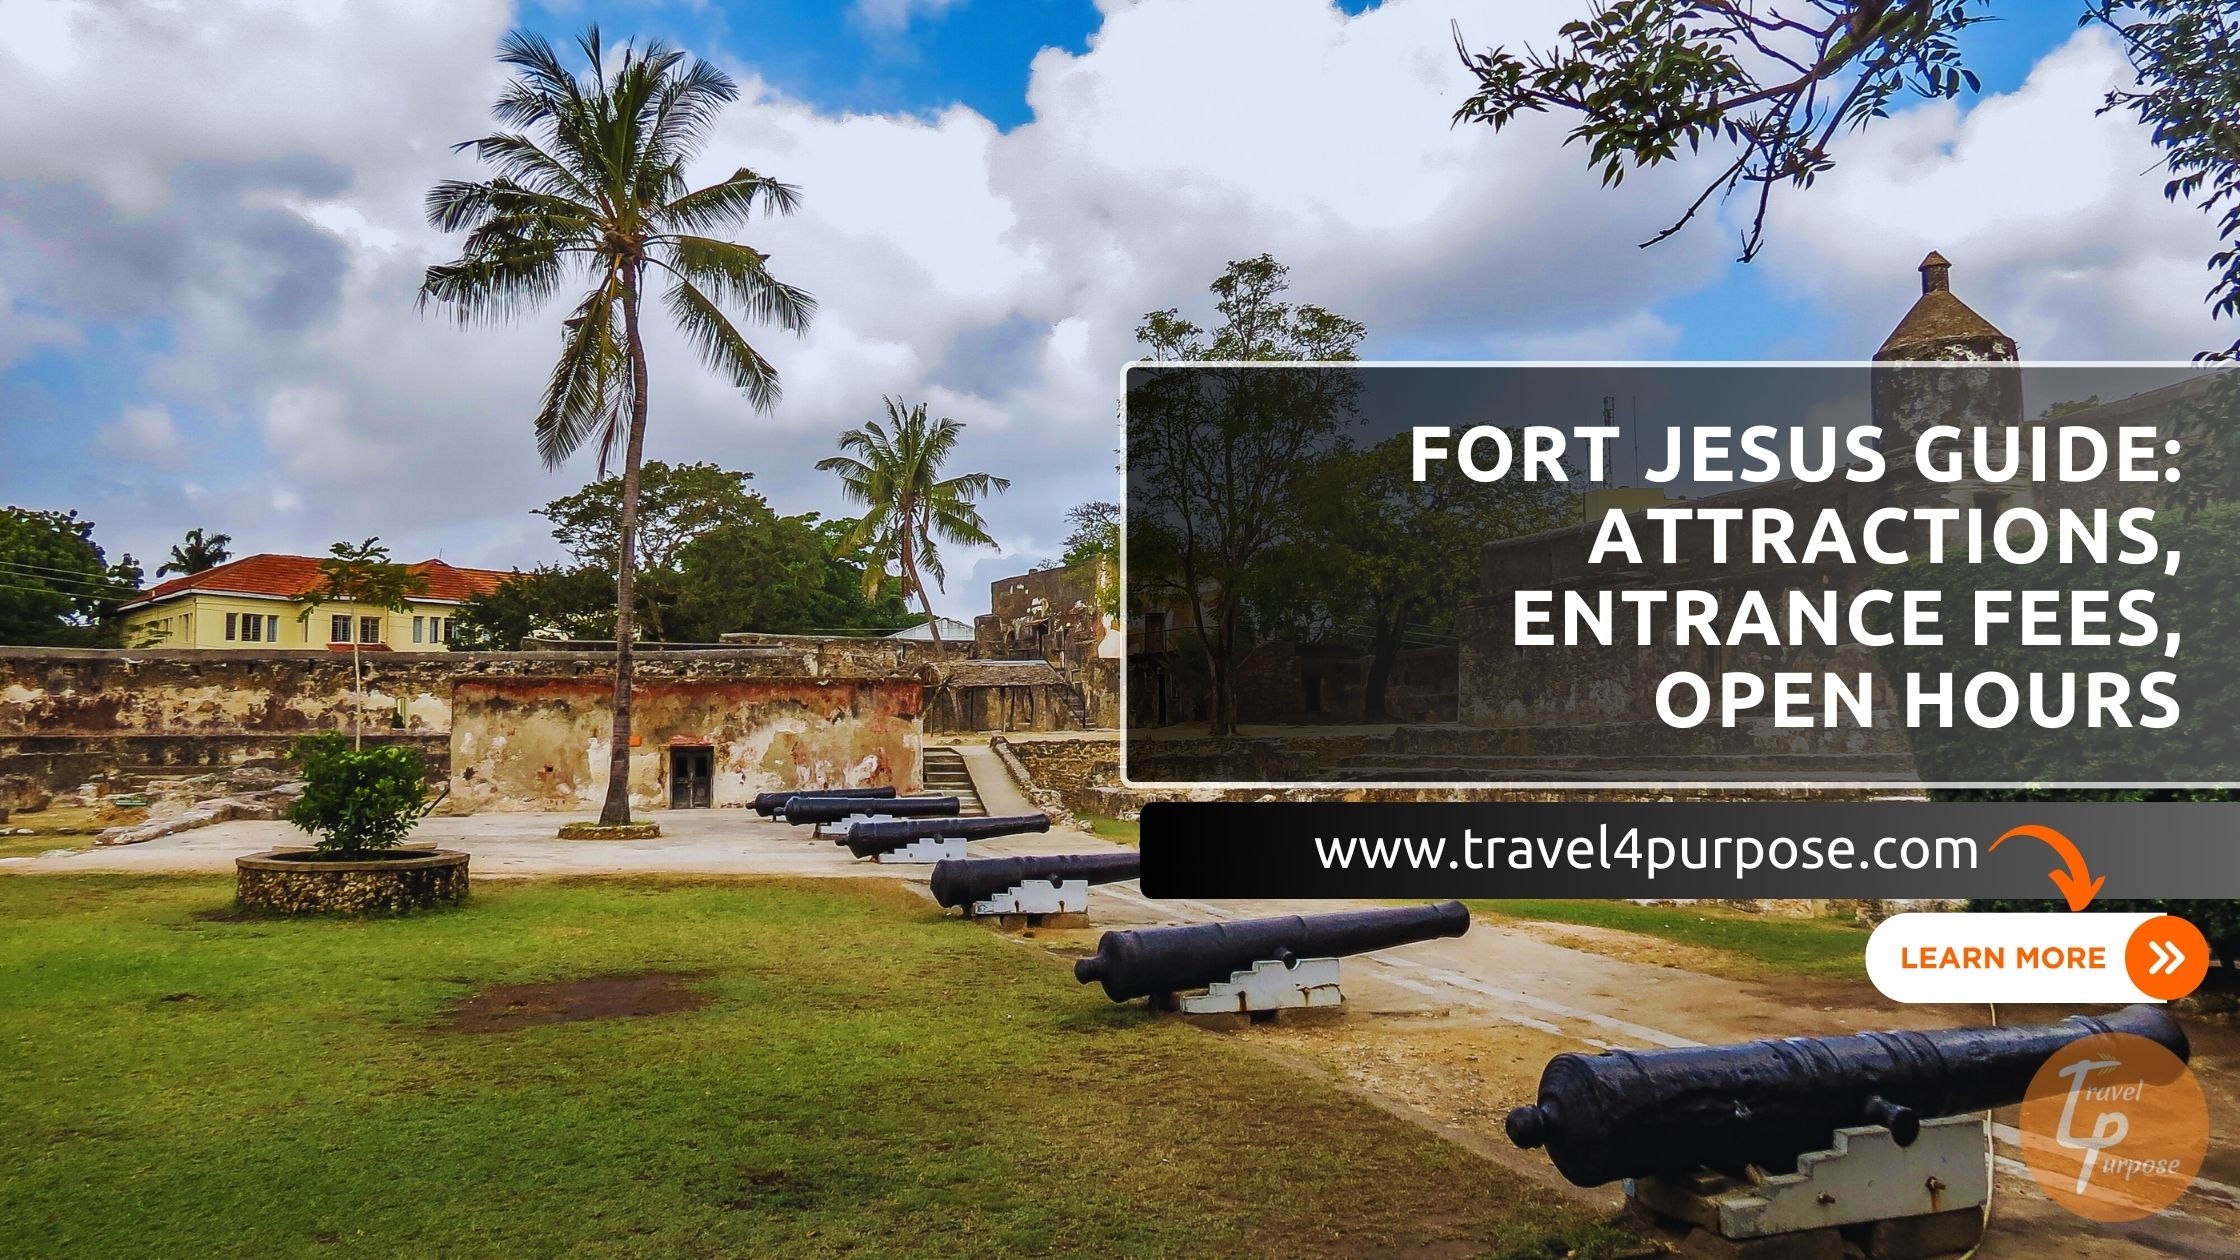 Fort Jesus Guide Attractions, Entry Fees, Open Hours - Travel4Purpose